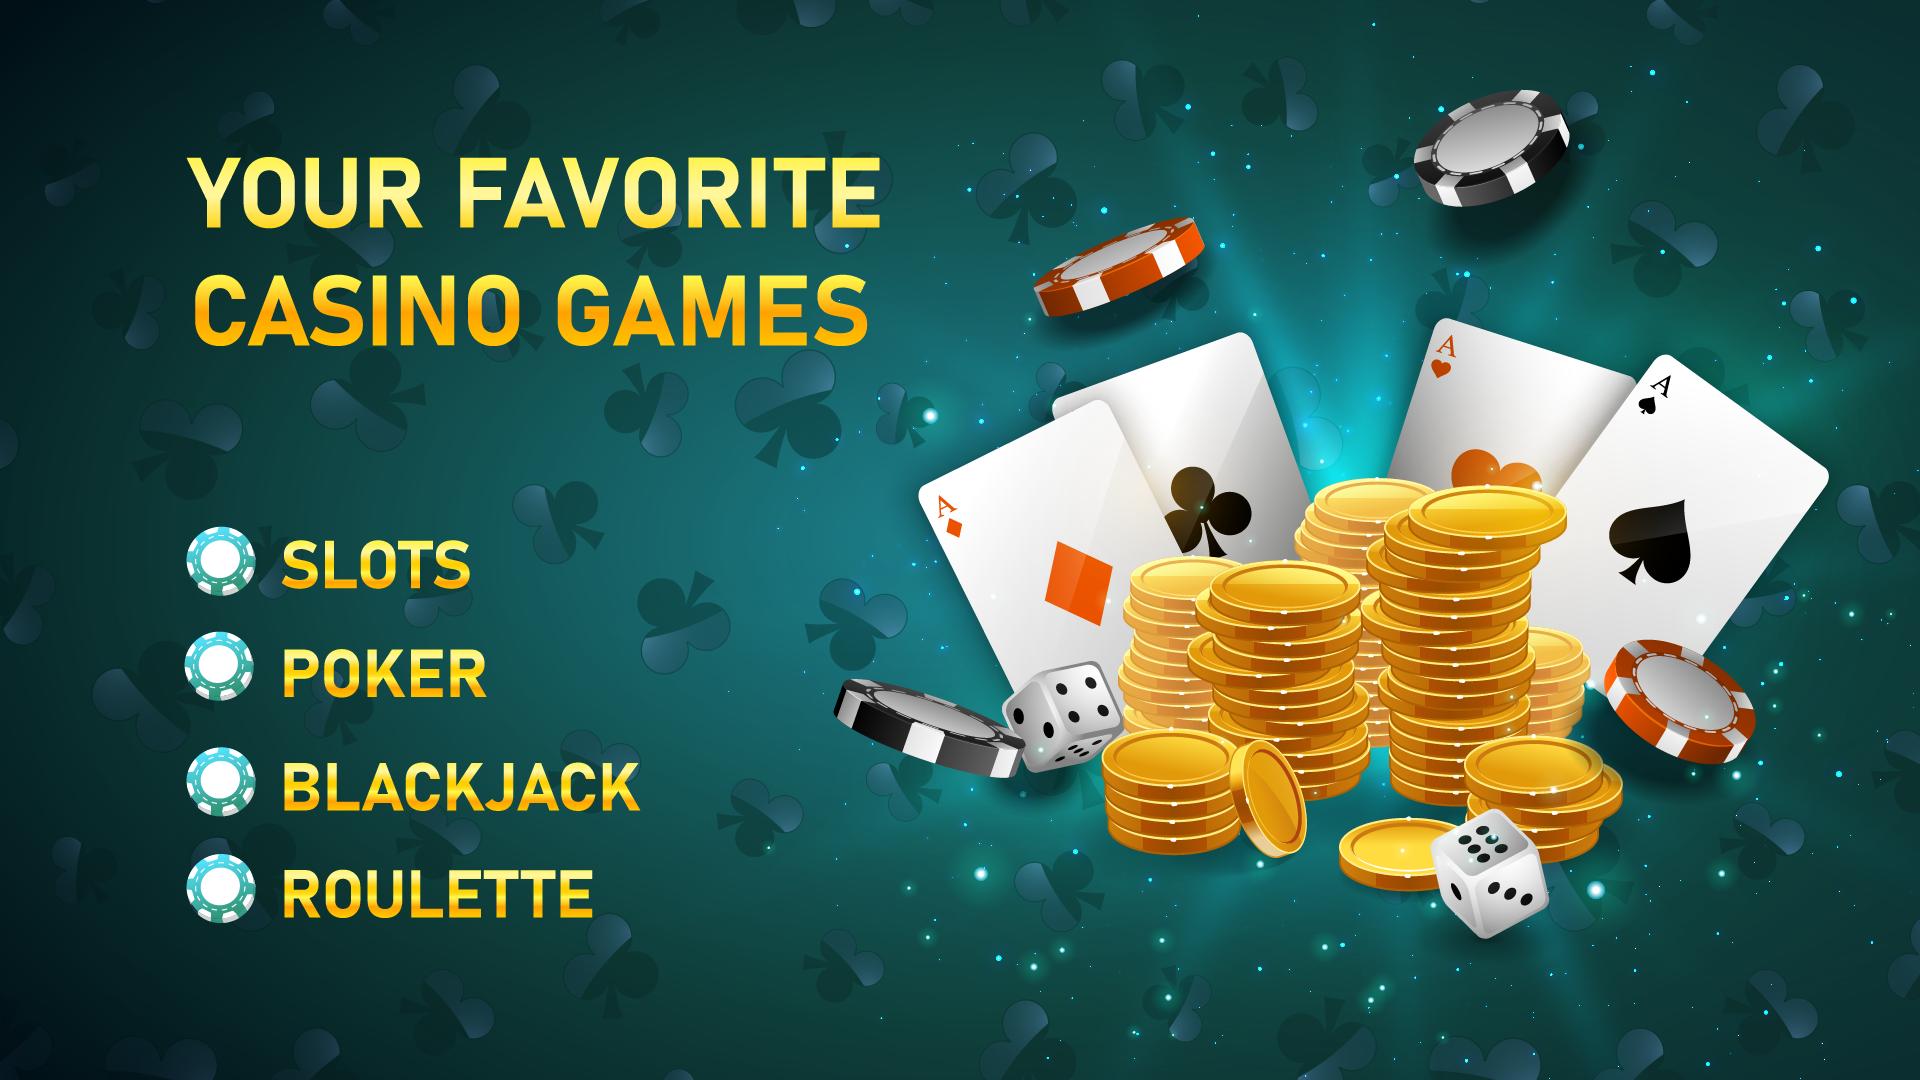 Casino Real Money Games | Play Casino Slots Games for Android - APK Download